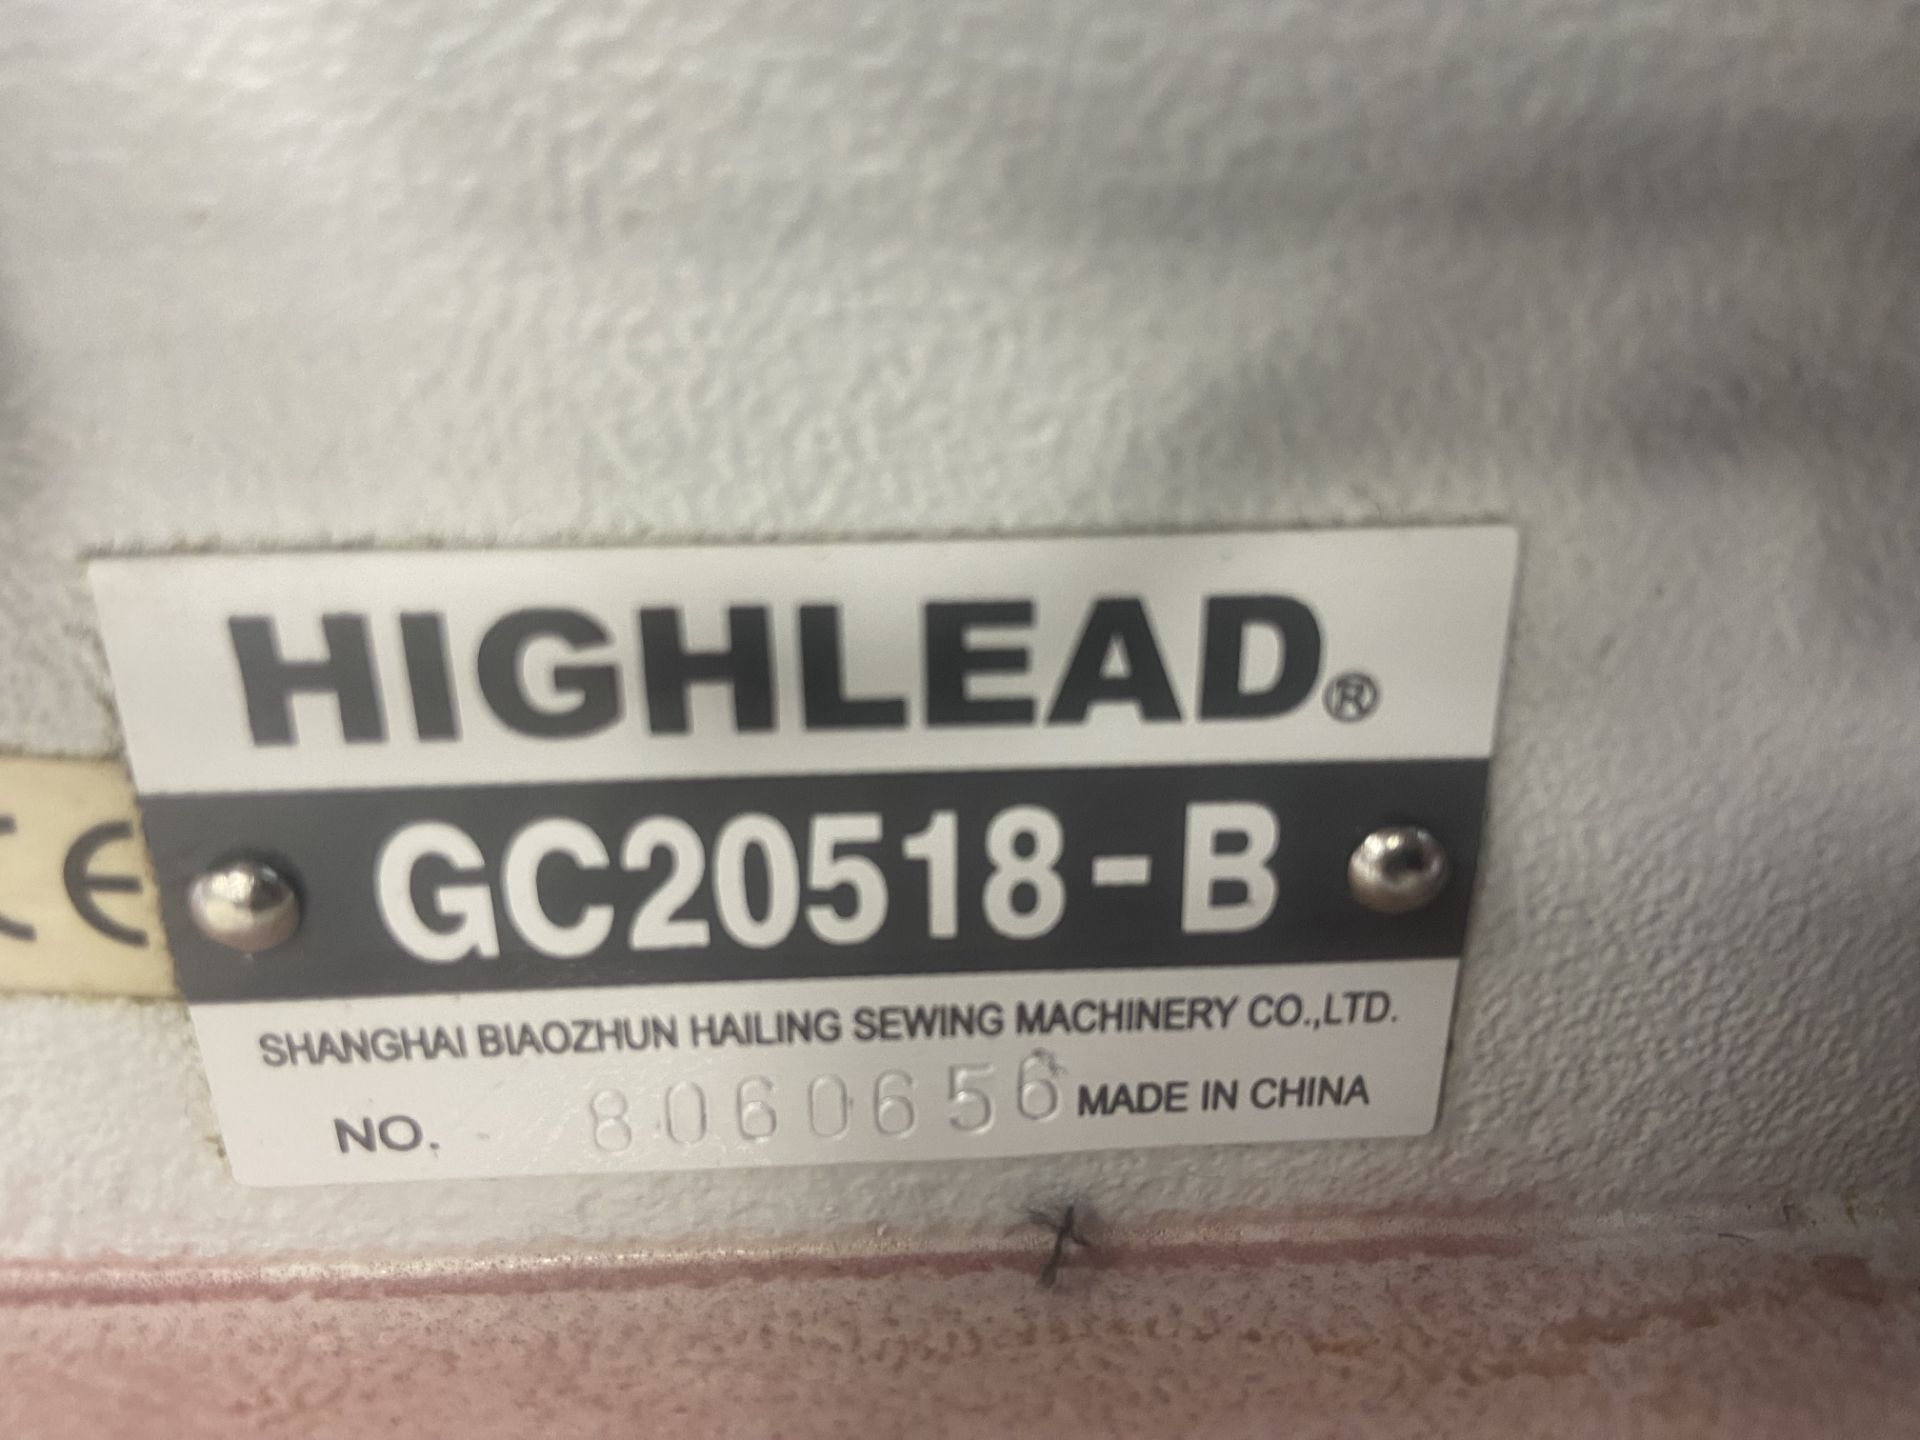 Highlead GC20518-B Lockstitch Sewing Machine, serial no. 8060656, with fitted pedal operated bed, - Image 6 of 6